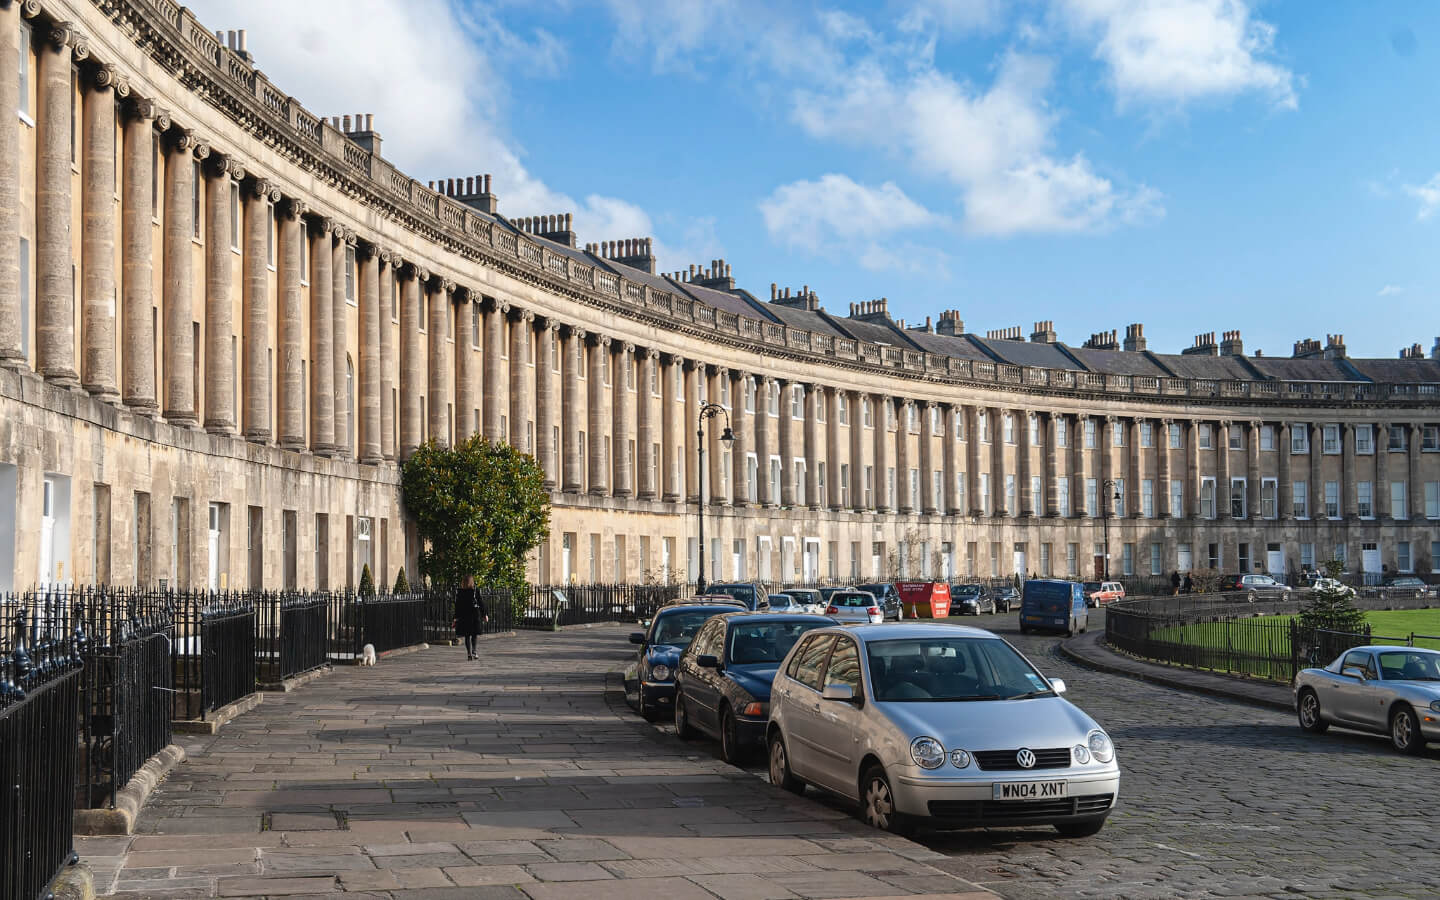 Student Accommodation in Bath City Centre, Bath - the Royal Crescent